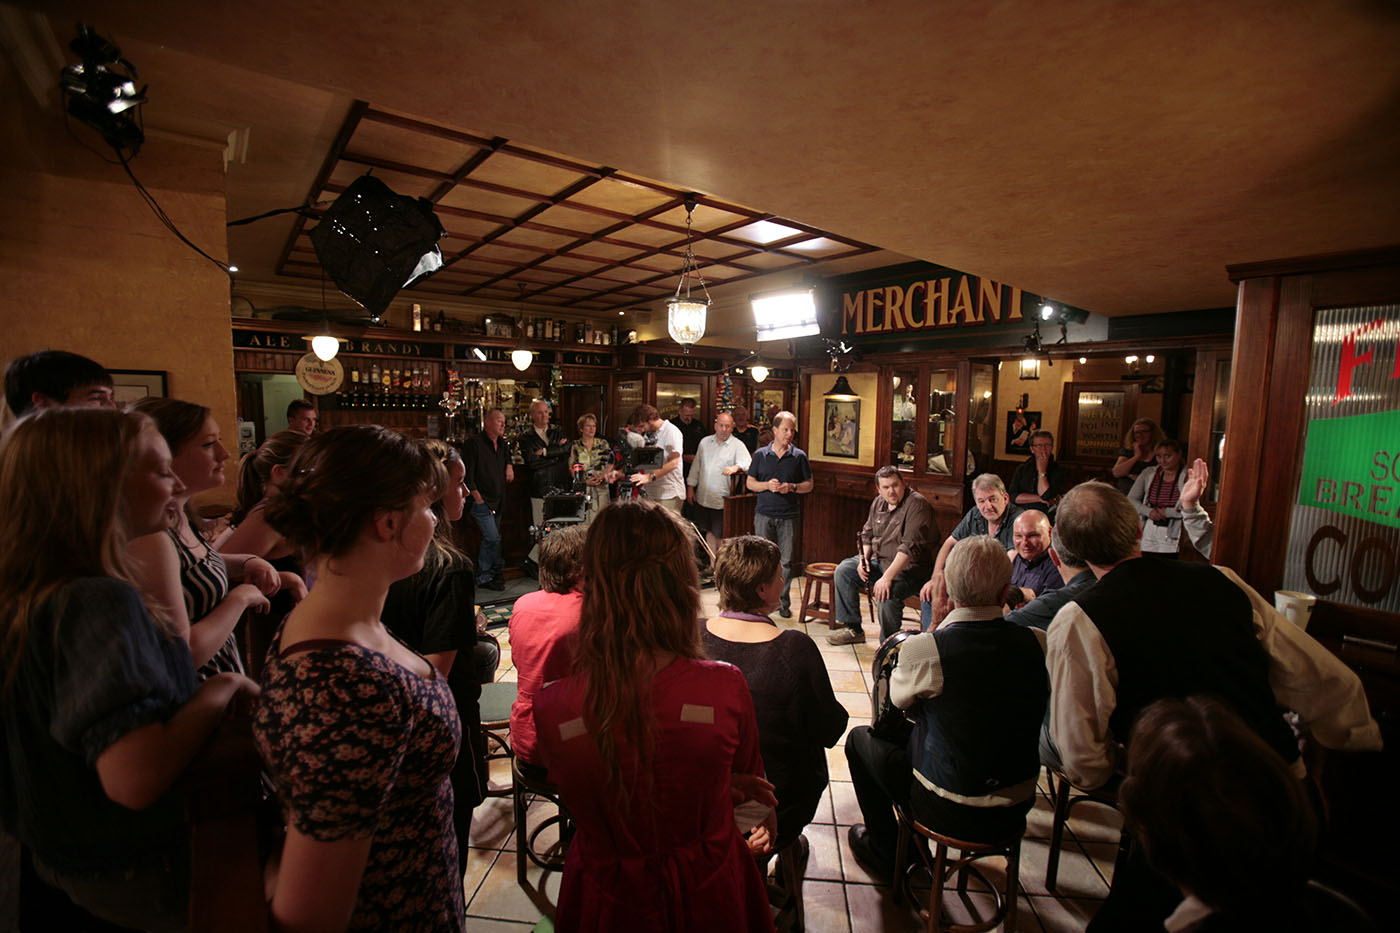 Musicians, Irish dancers and film crew on set in a pub. - click to view larger image